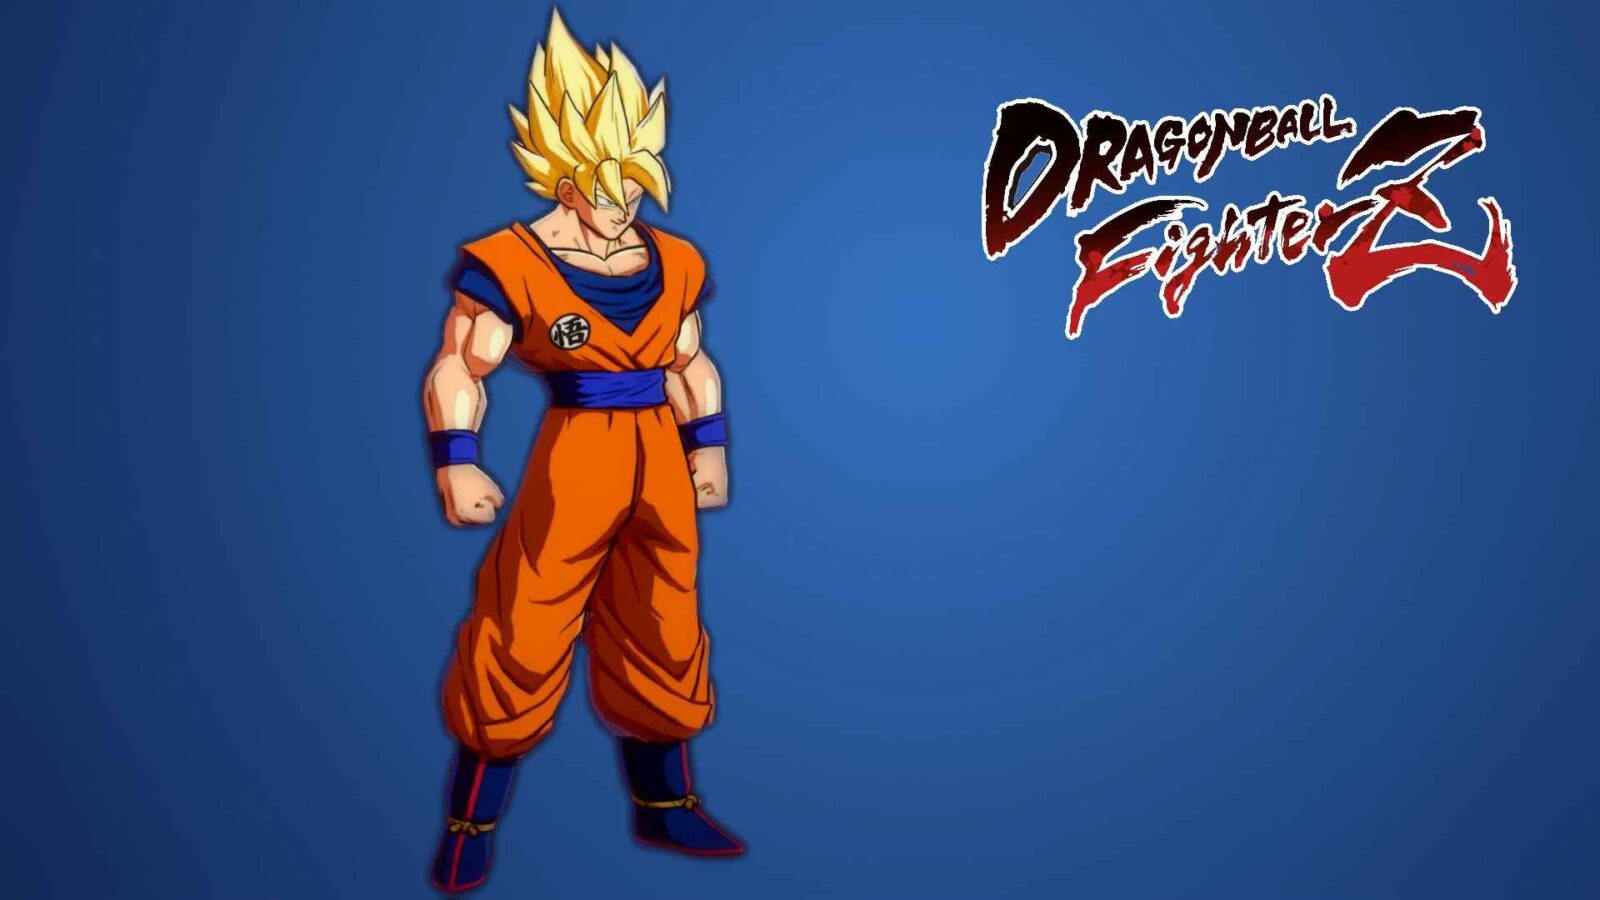 LiveWallpapers4Free.com | Goku Dragon Ball Fighterz Game - Free Live Wallpaper